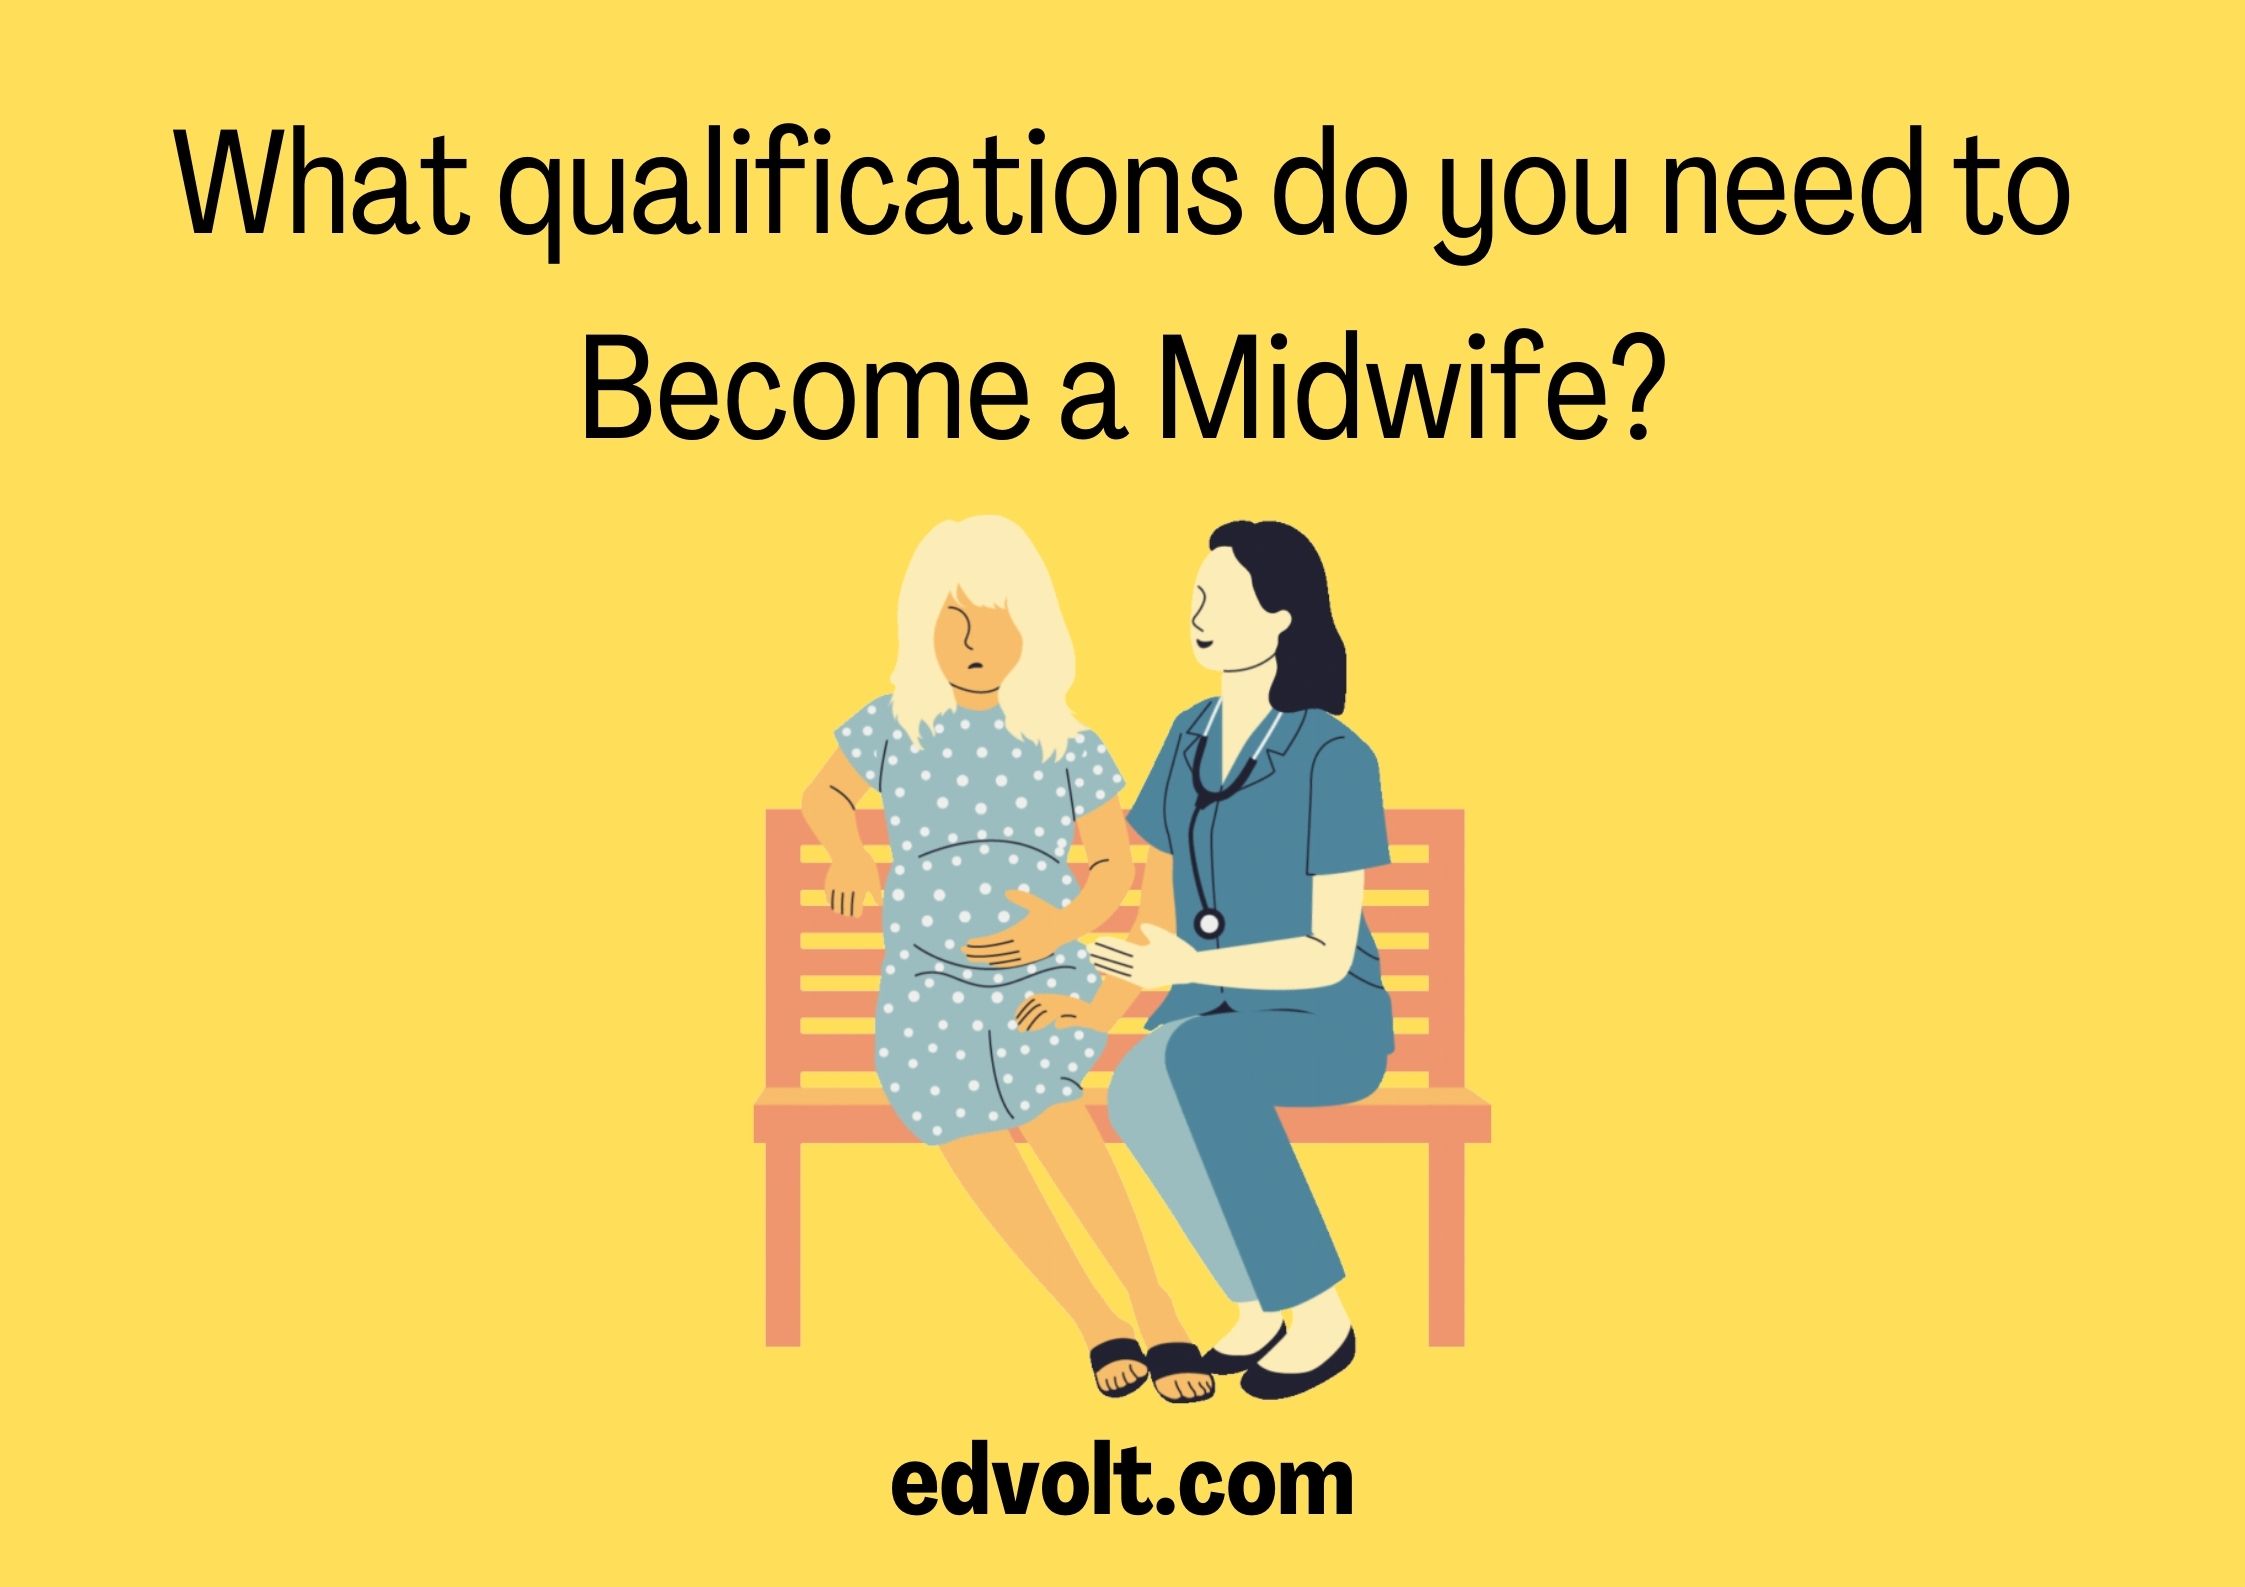 What qualifications do you need to Become a Midwife?